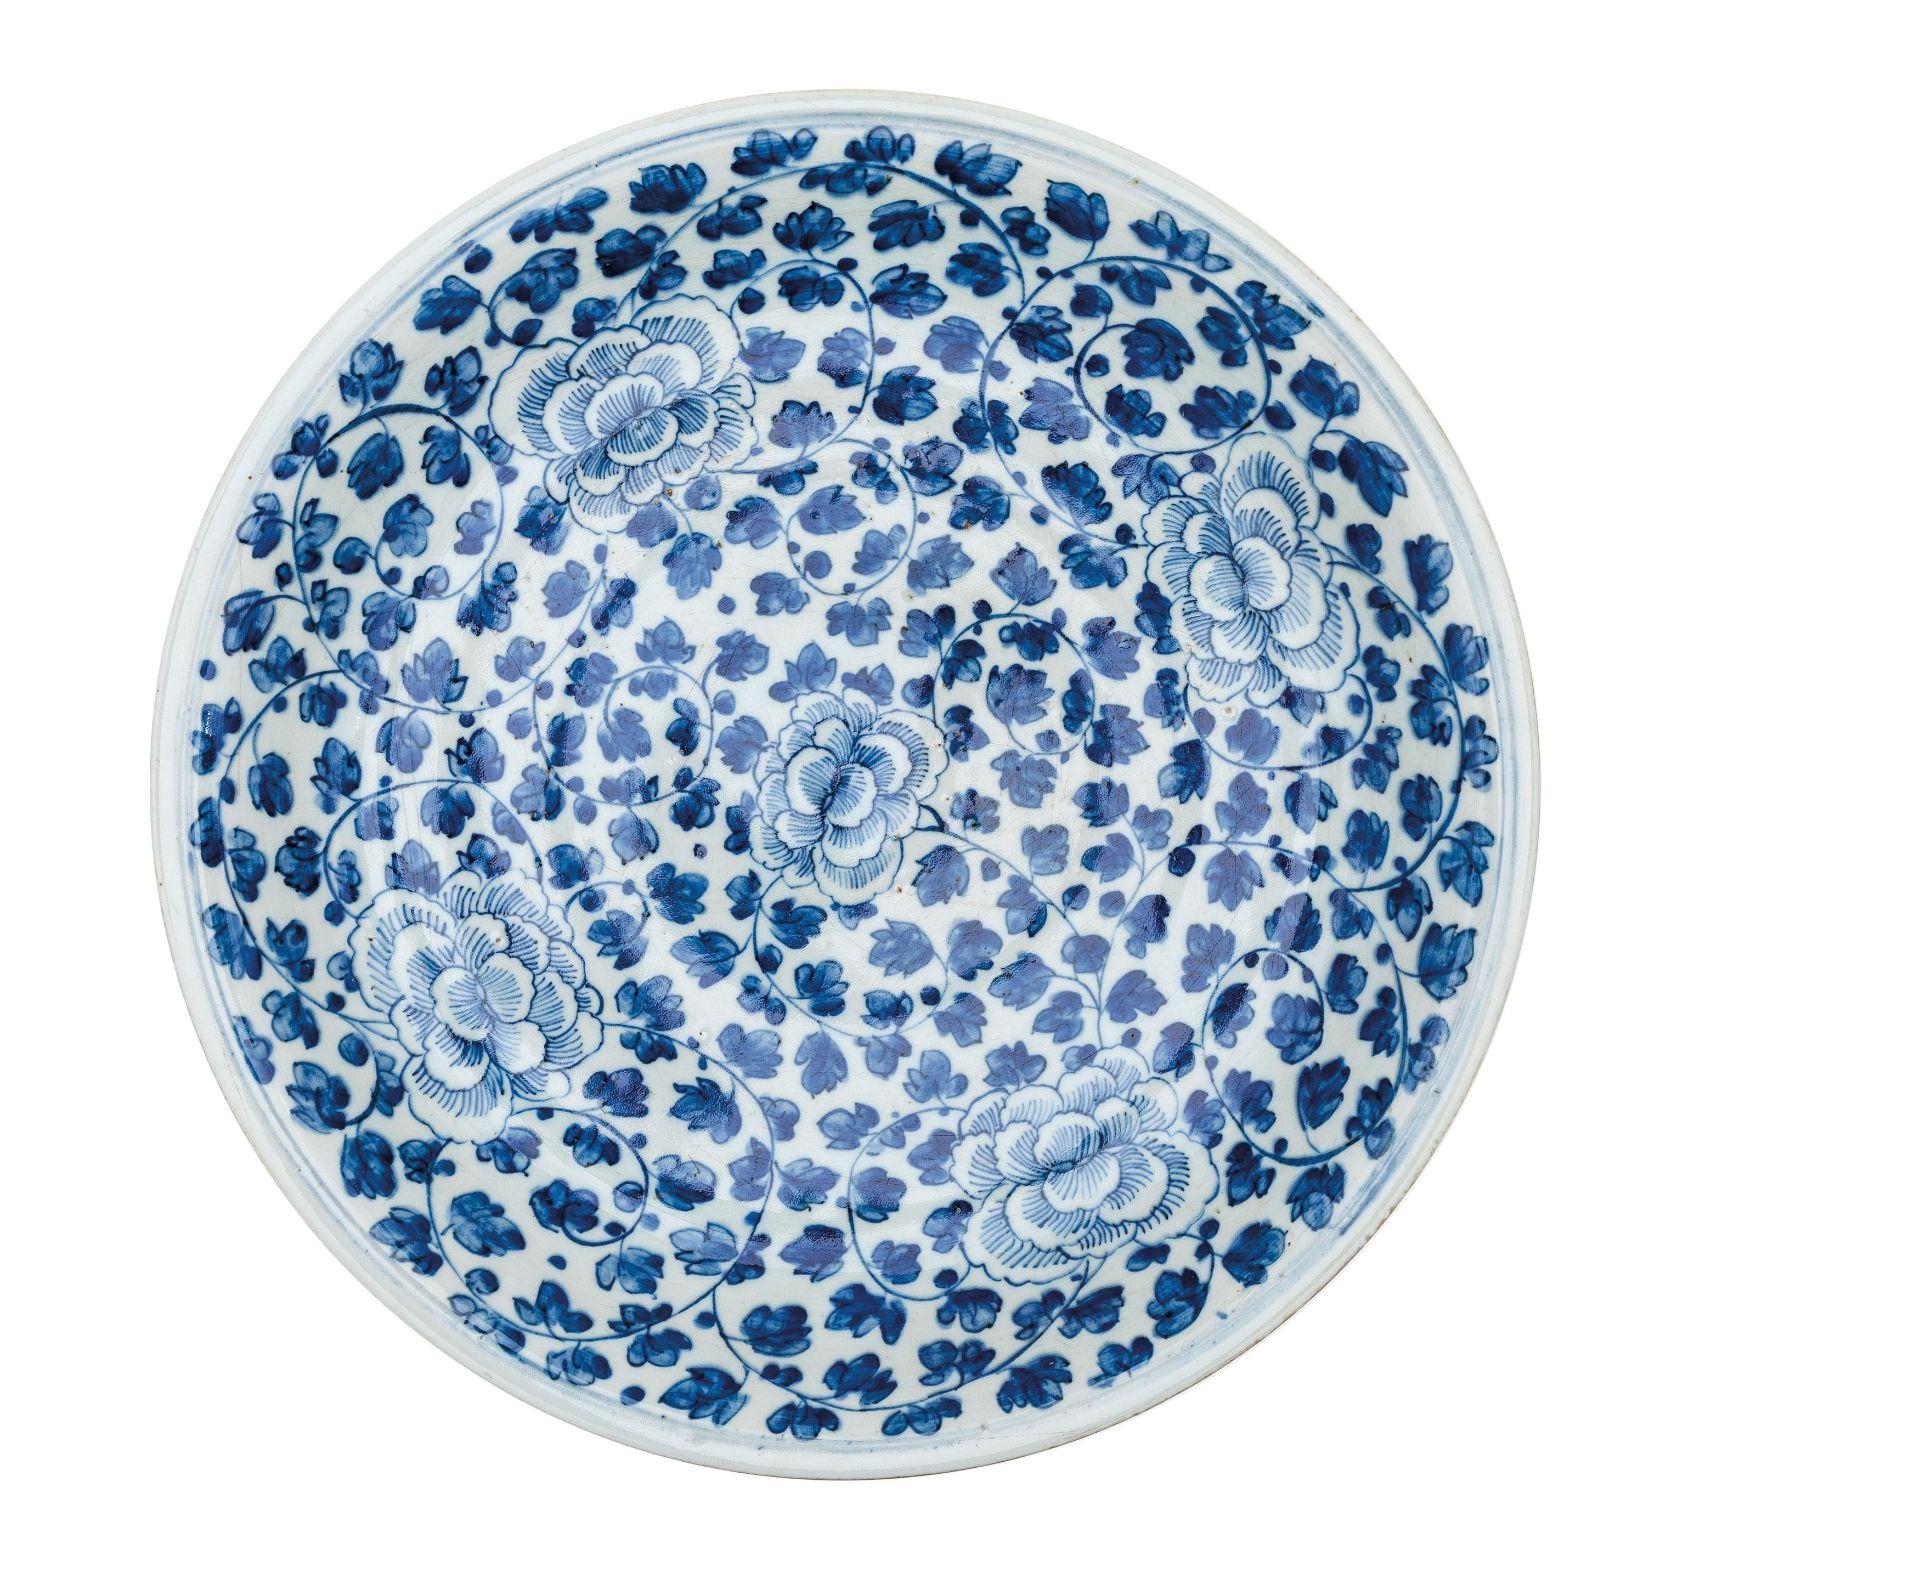 A LARGE BLUE AND WHITE SAUCER DISH, CHINA, 19TH CENTURY